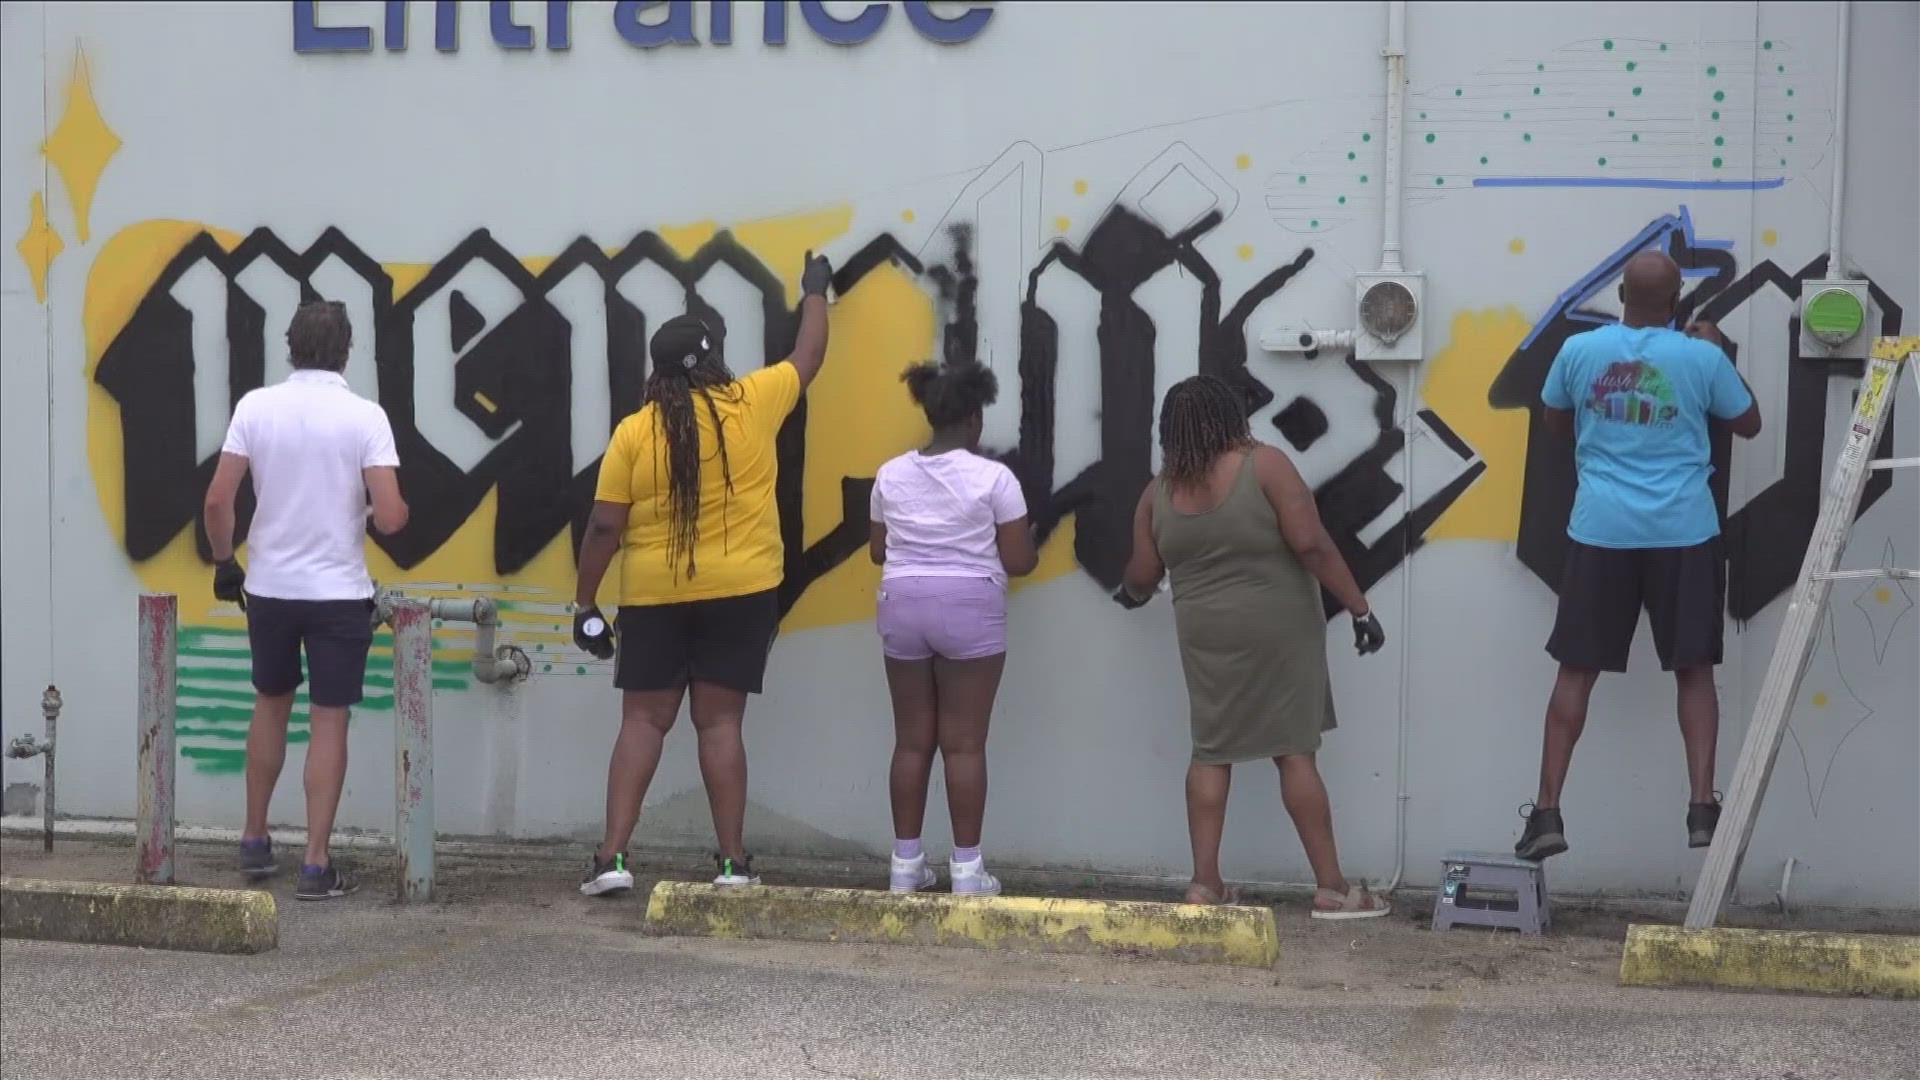 Those with "Paint Memphis" said the organization is all about being able to express oneself.